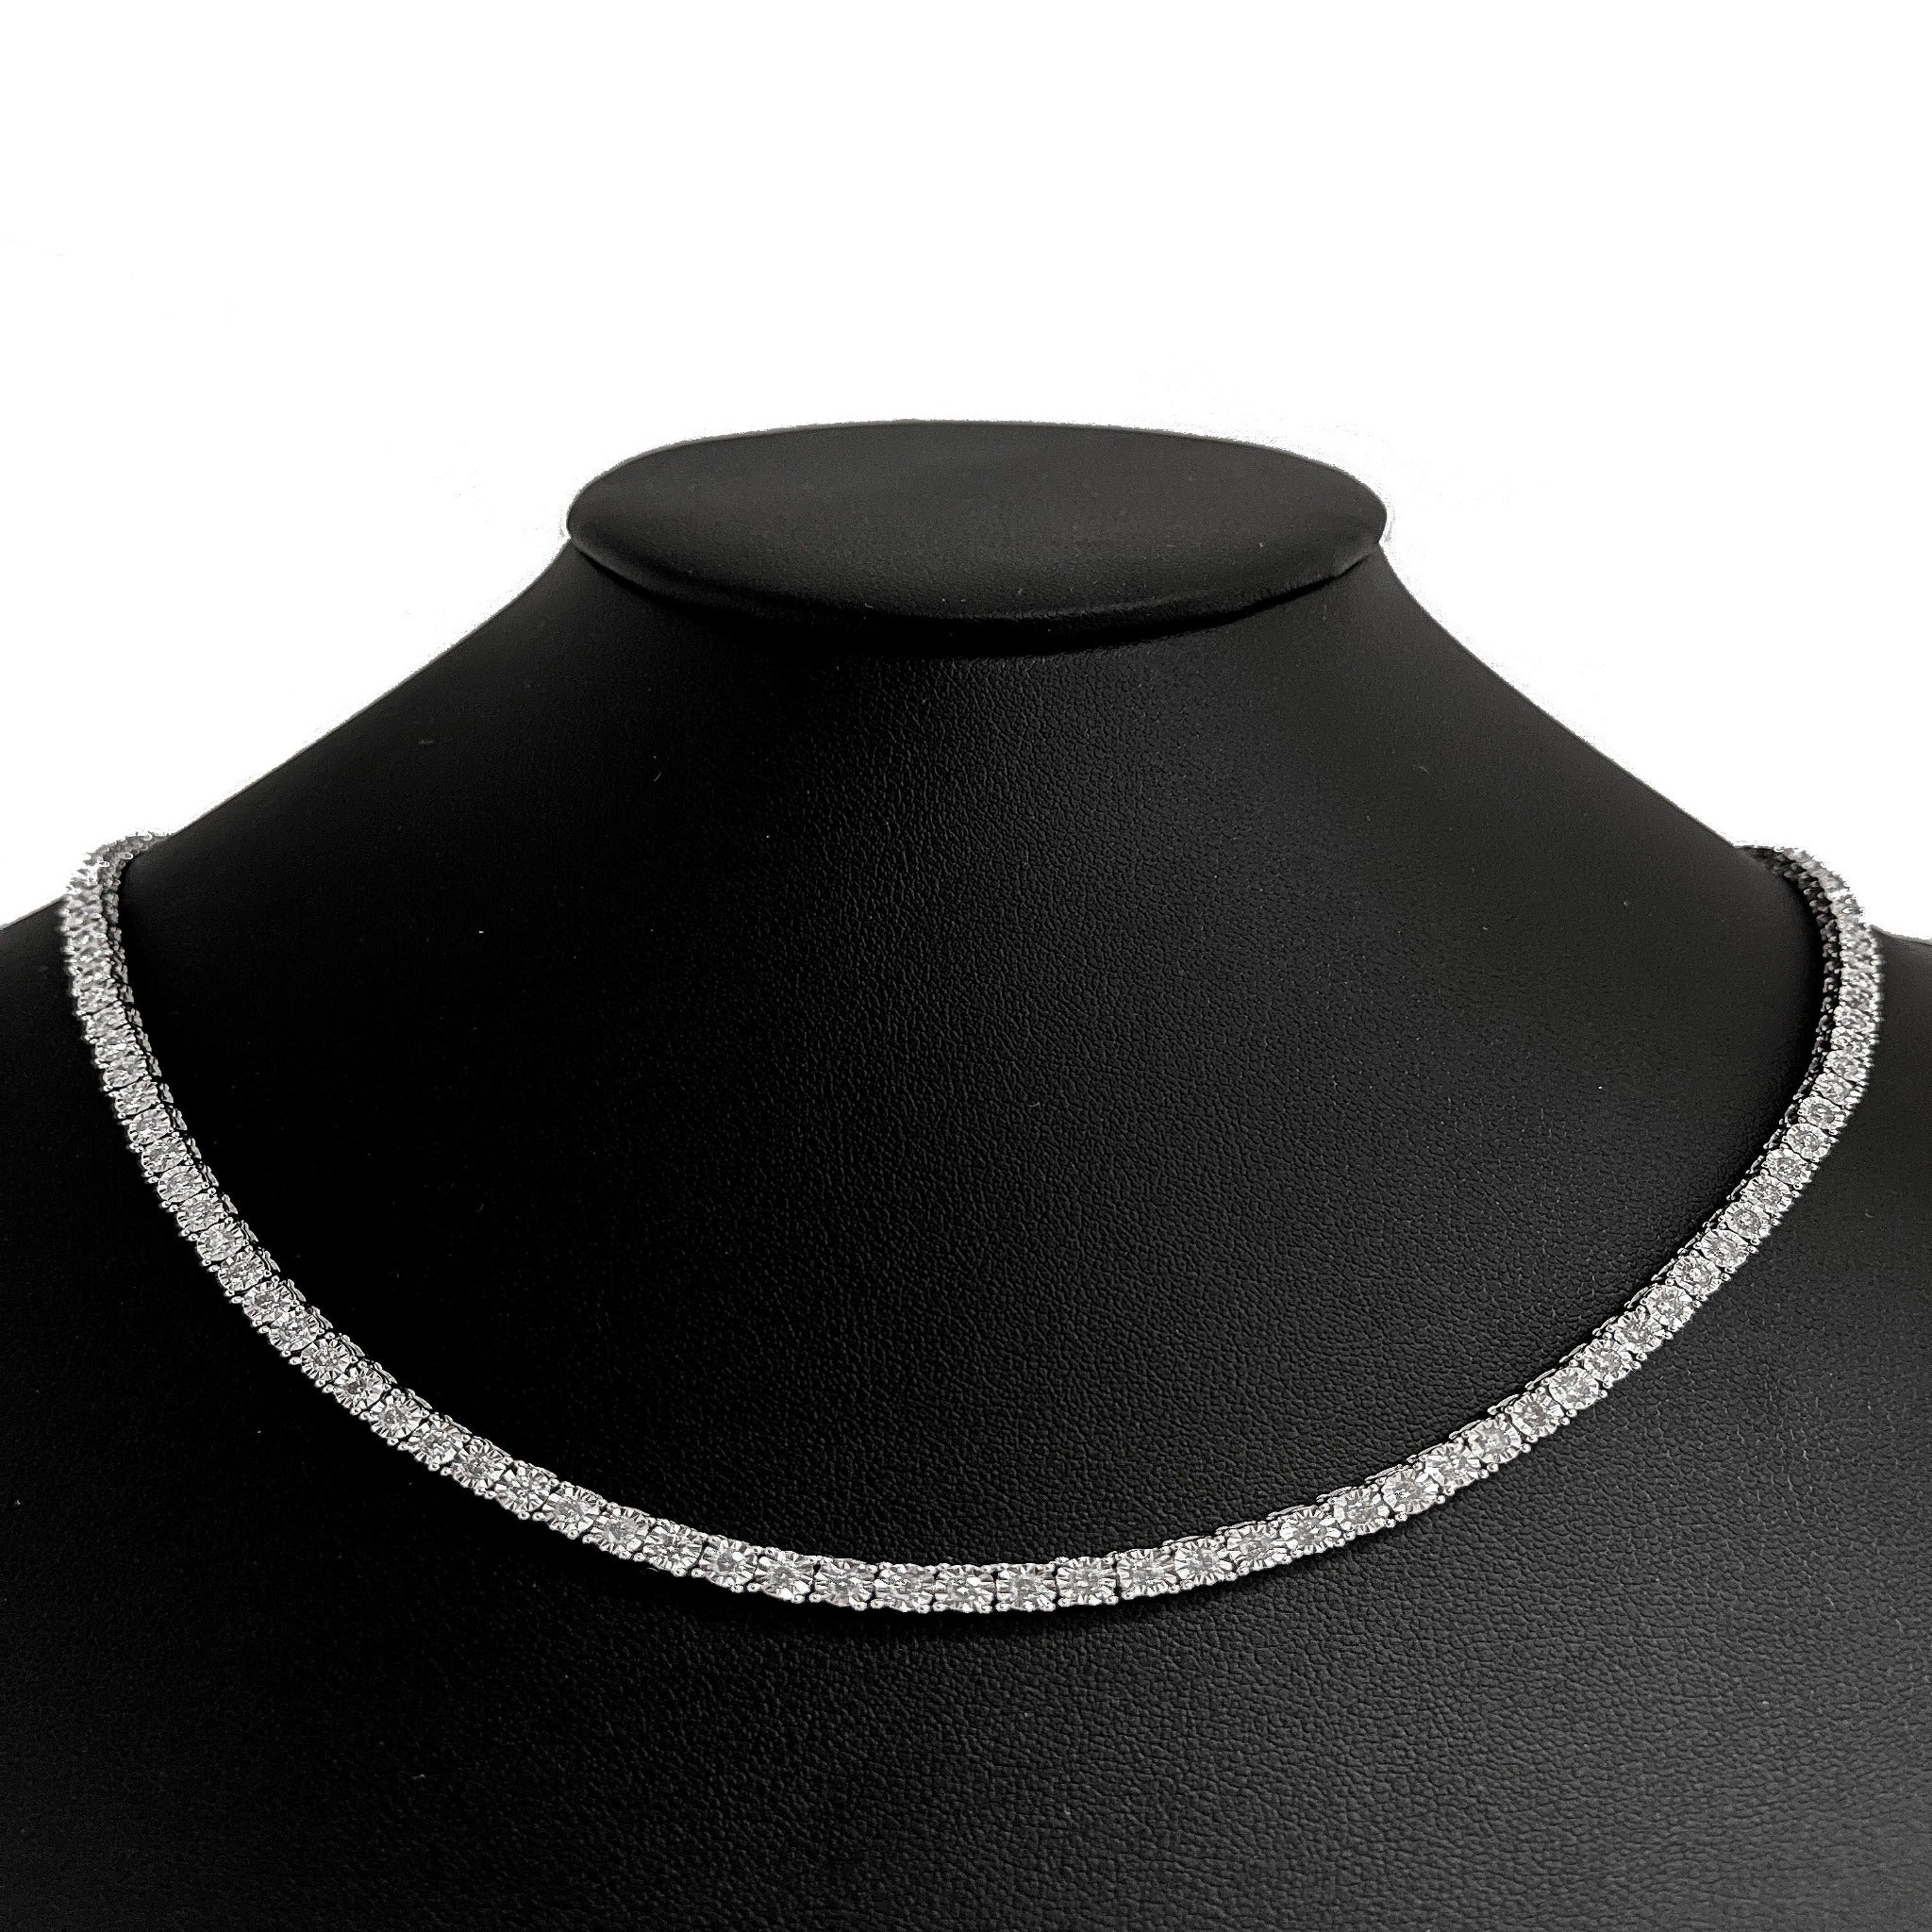 ''SPECIAL! 5.07ct 14K White GOLD Tennis Miracle Illusion Necklace 22''''''